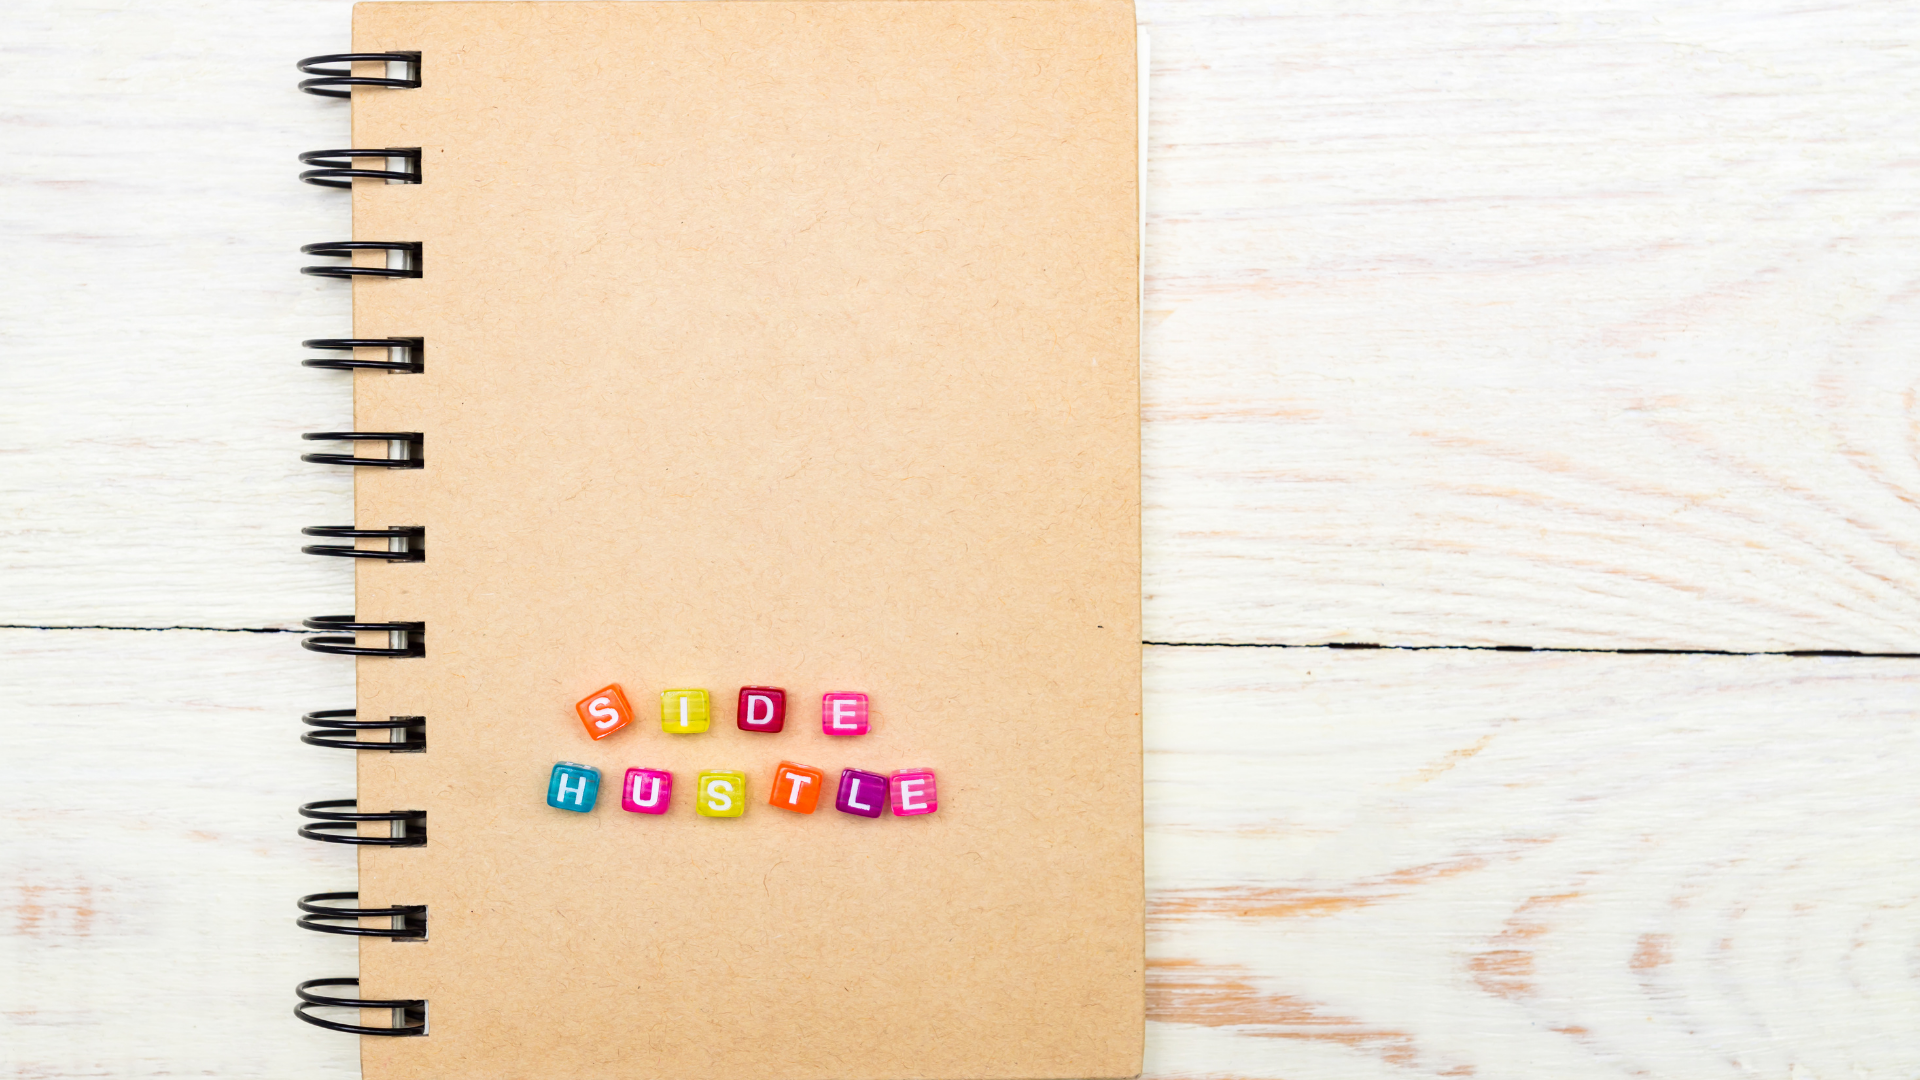 notepad with side hustle spelled out using colorful blocks on front cover